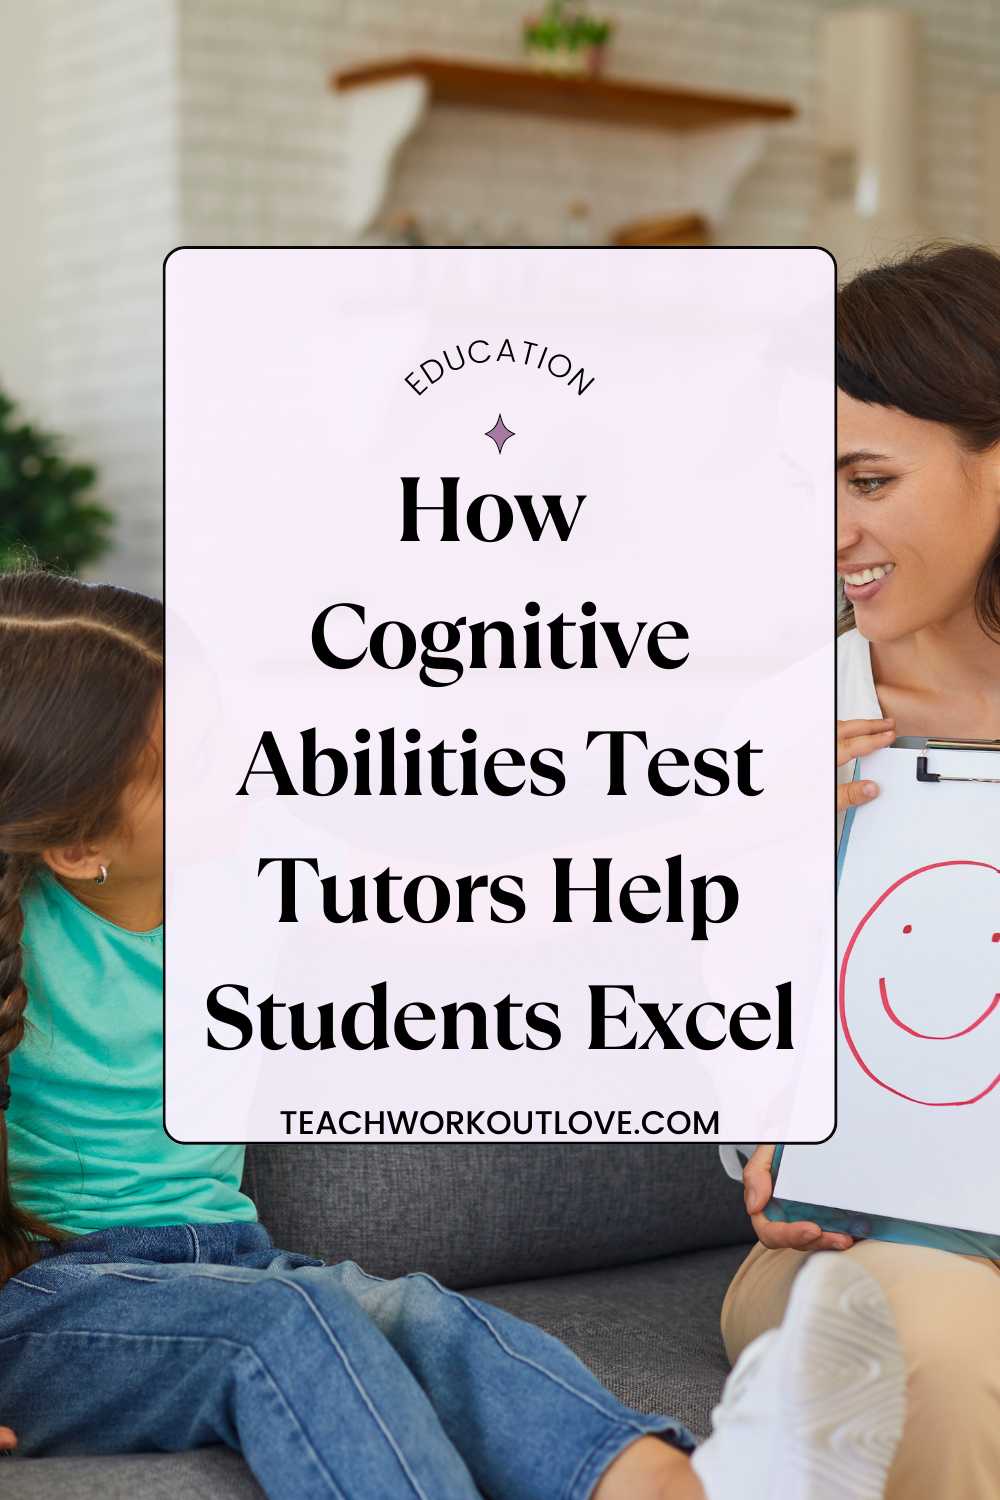 This article highlights several strategies and benefits of using CogAT tutors as it explores the complex role that tutors play in assisting students to achieve their objectives.